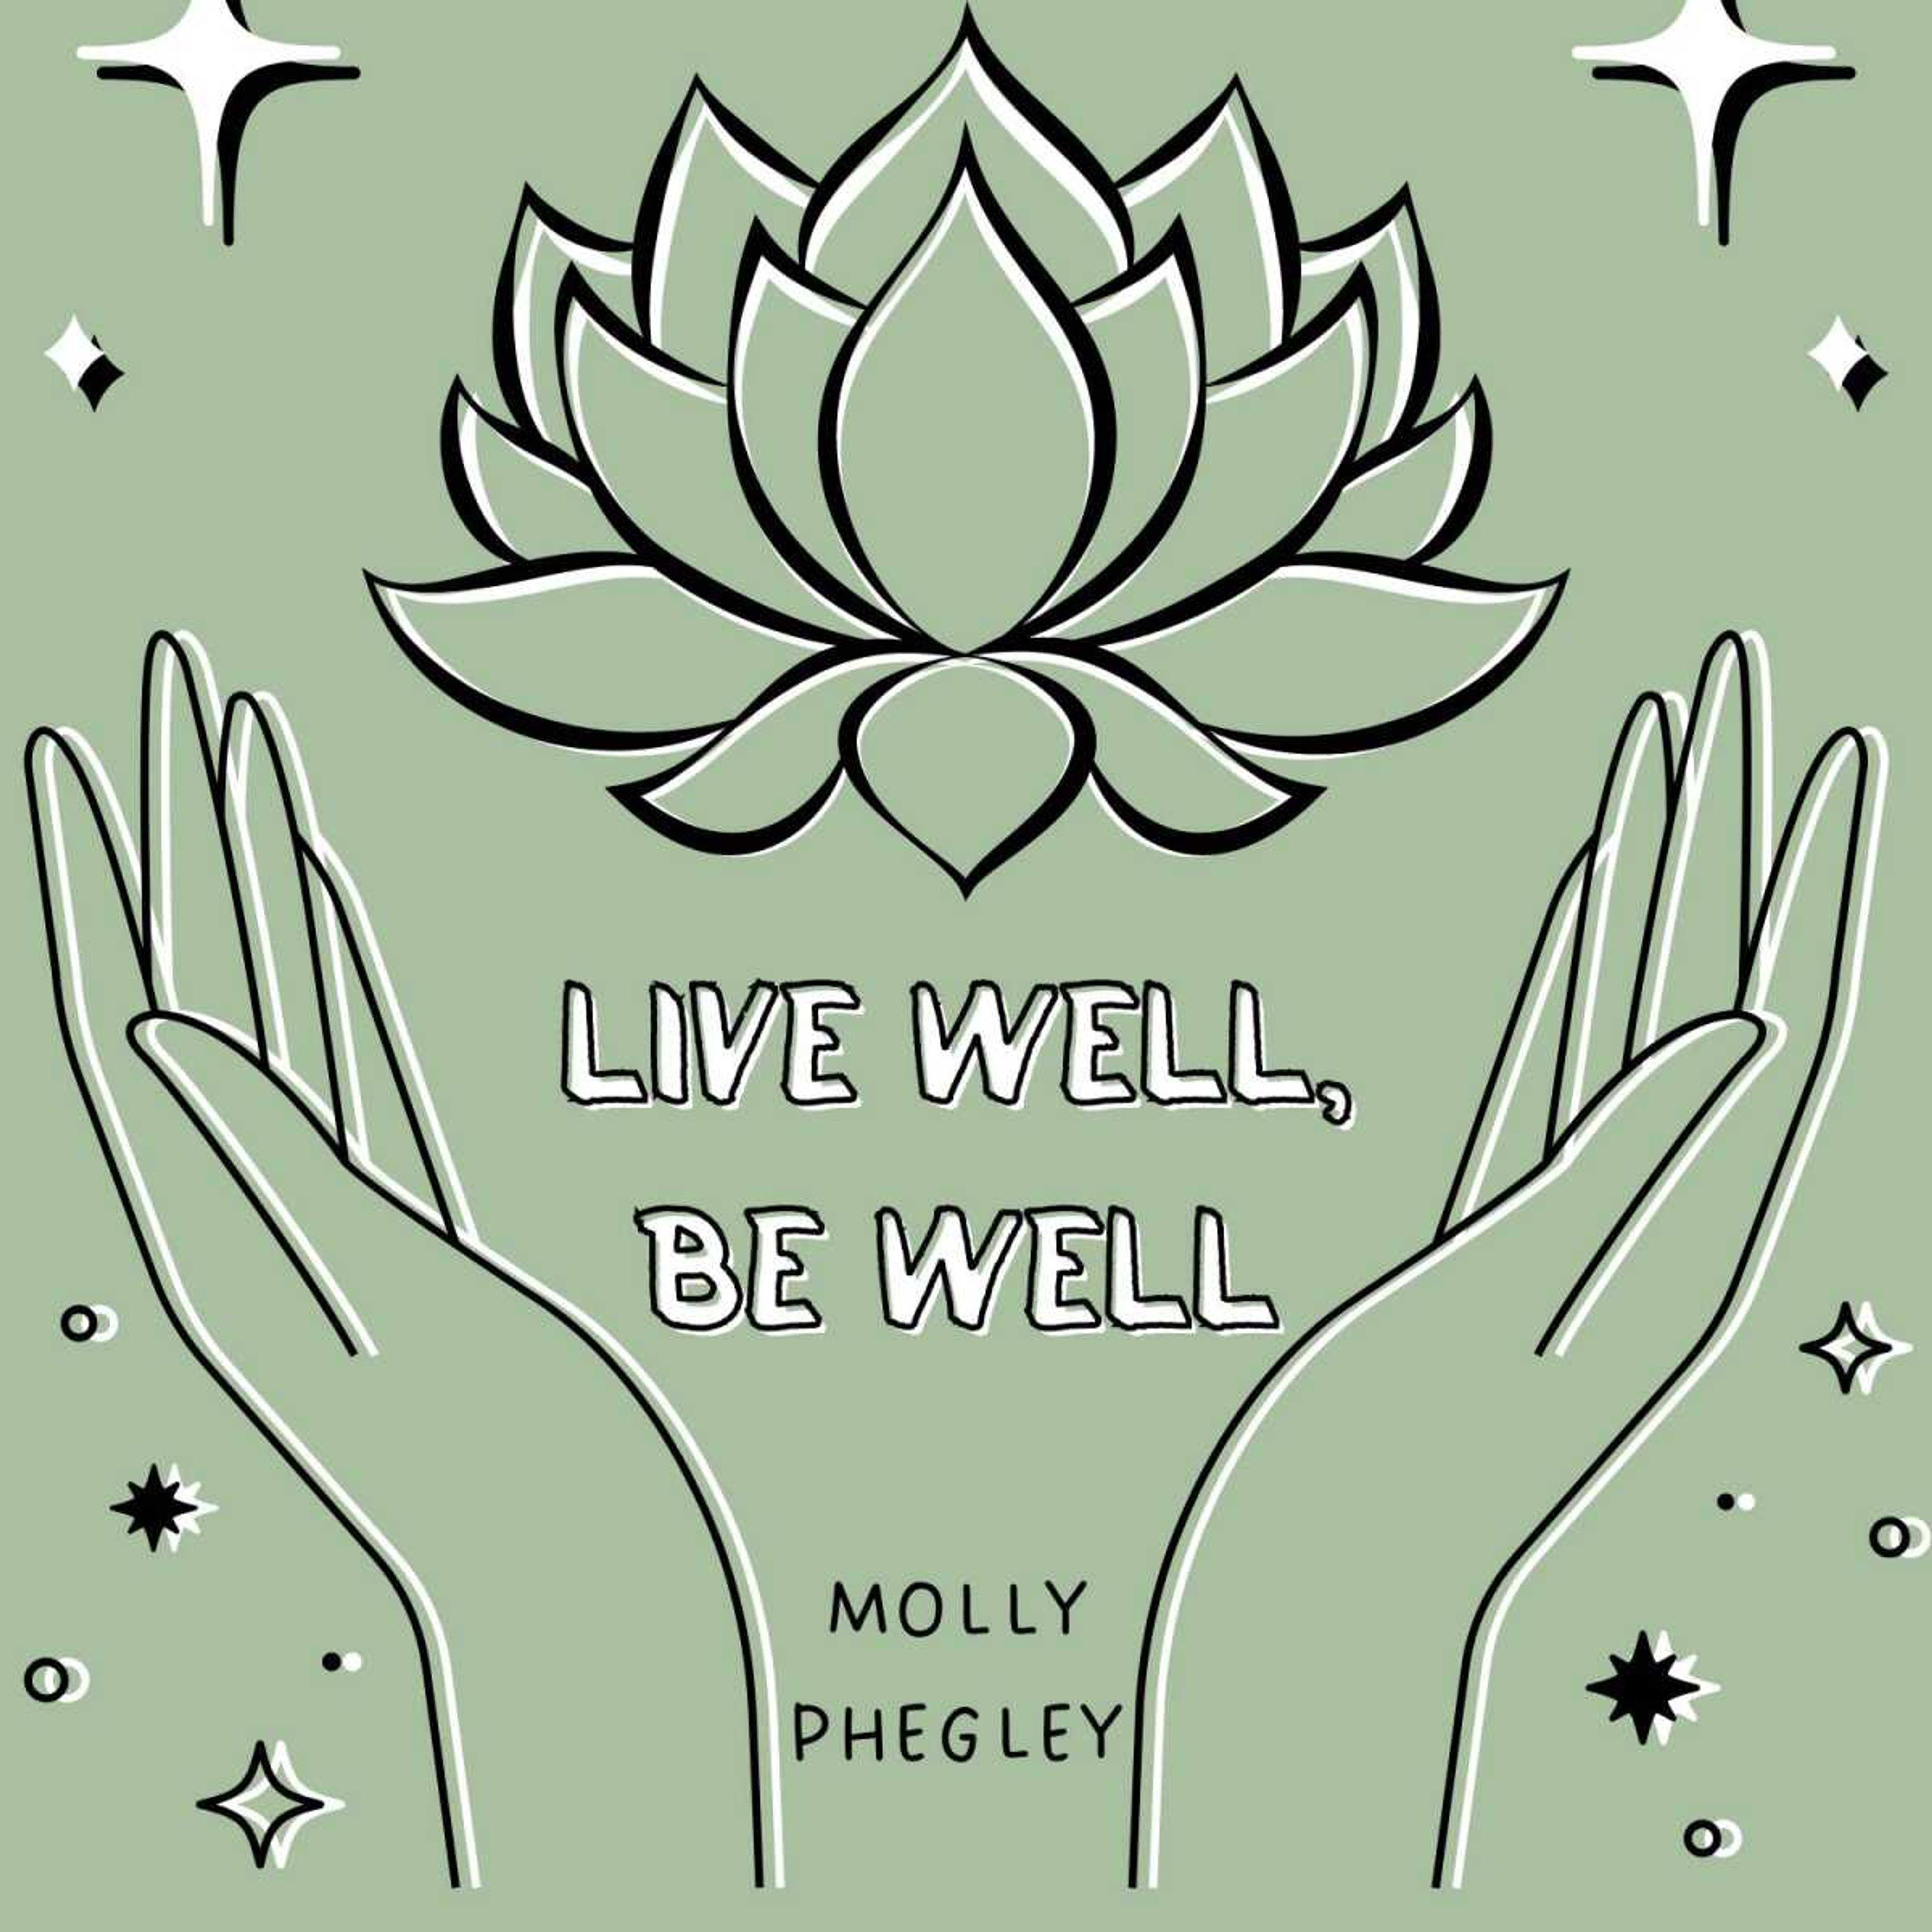 Live Well, Be Well: The power of breath